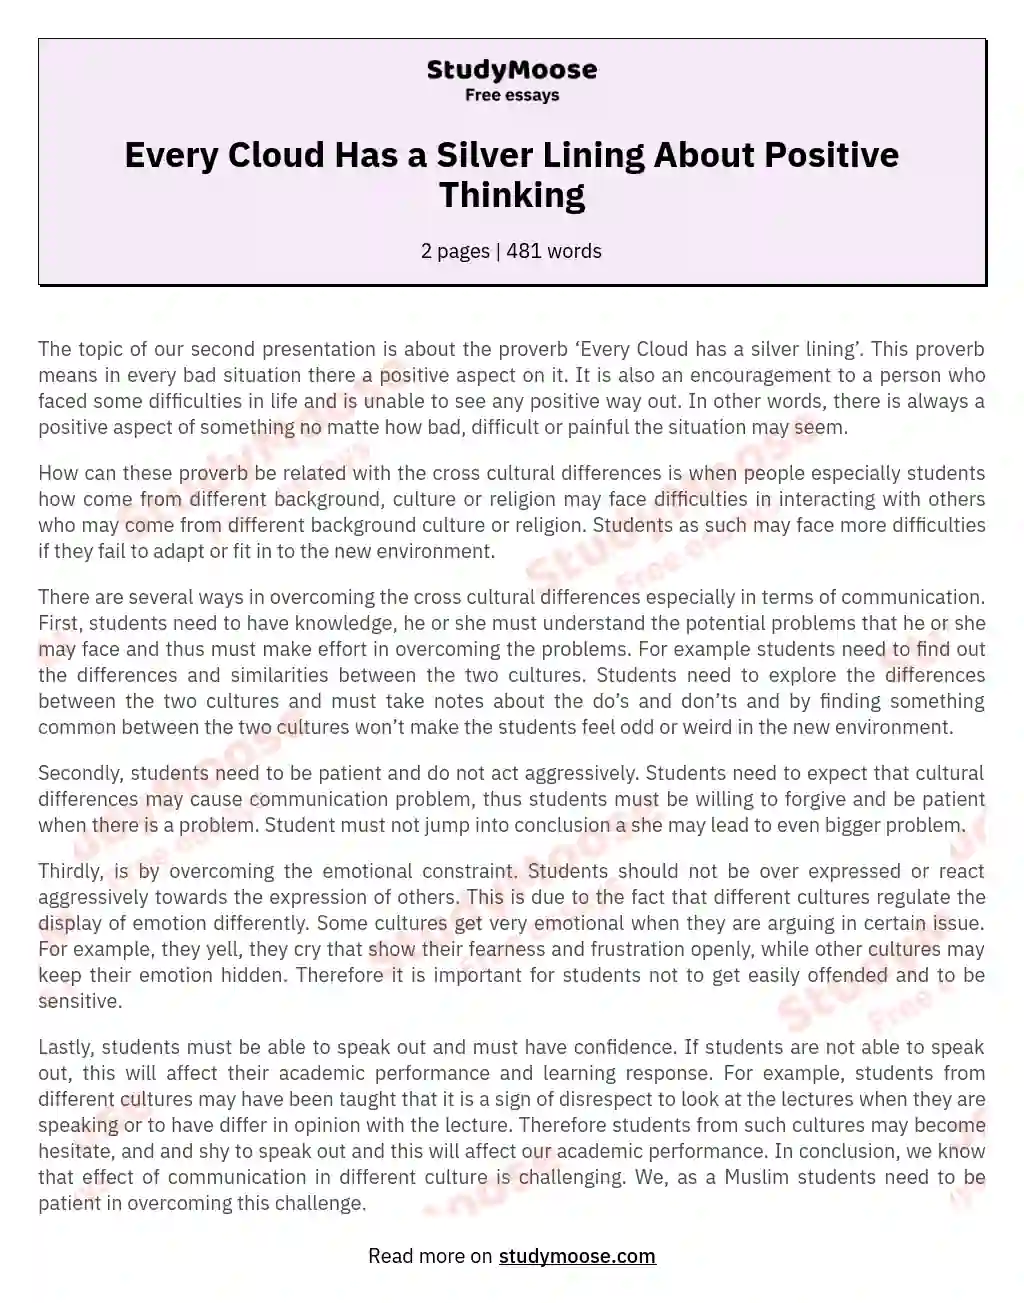 Every Cloud Has a Silver Lining About Positive Thinking essay